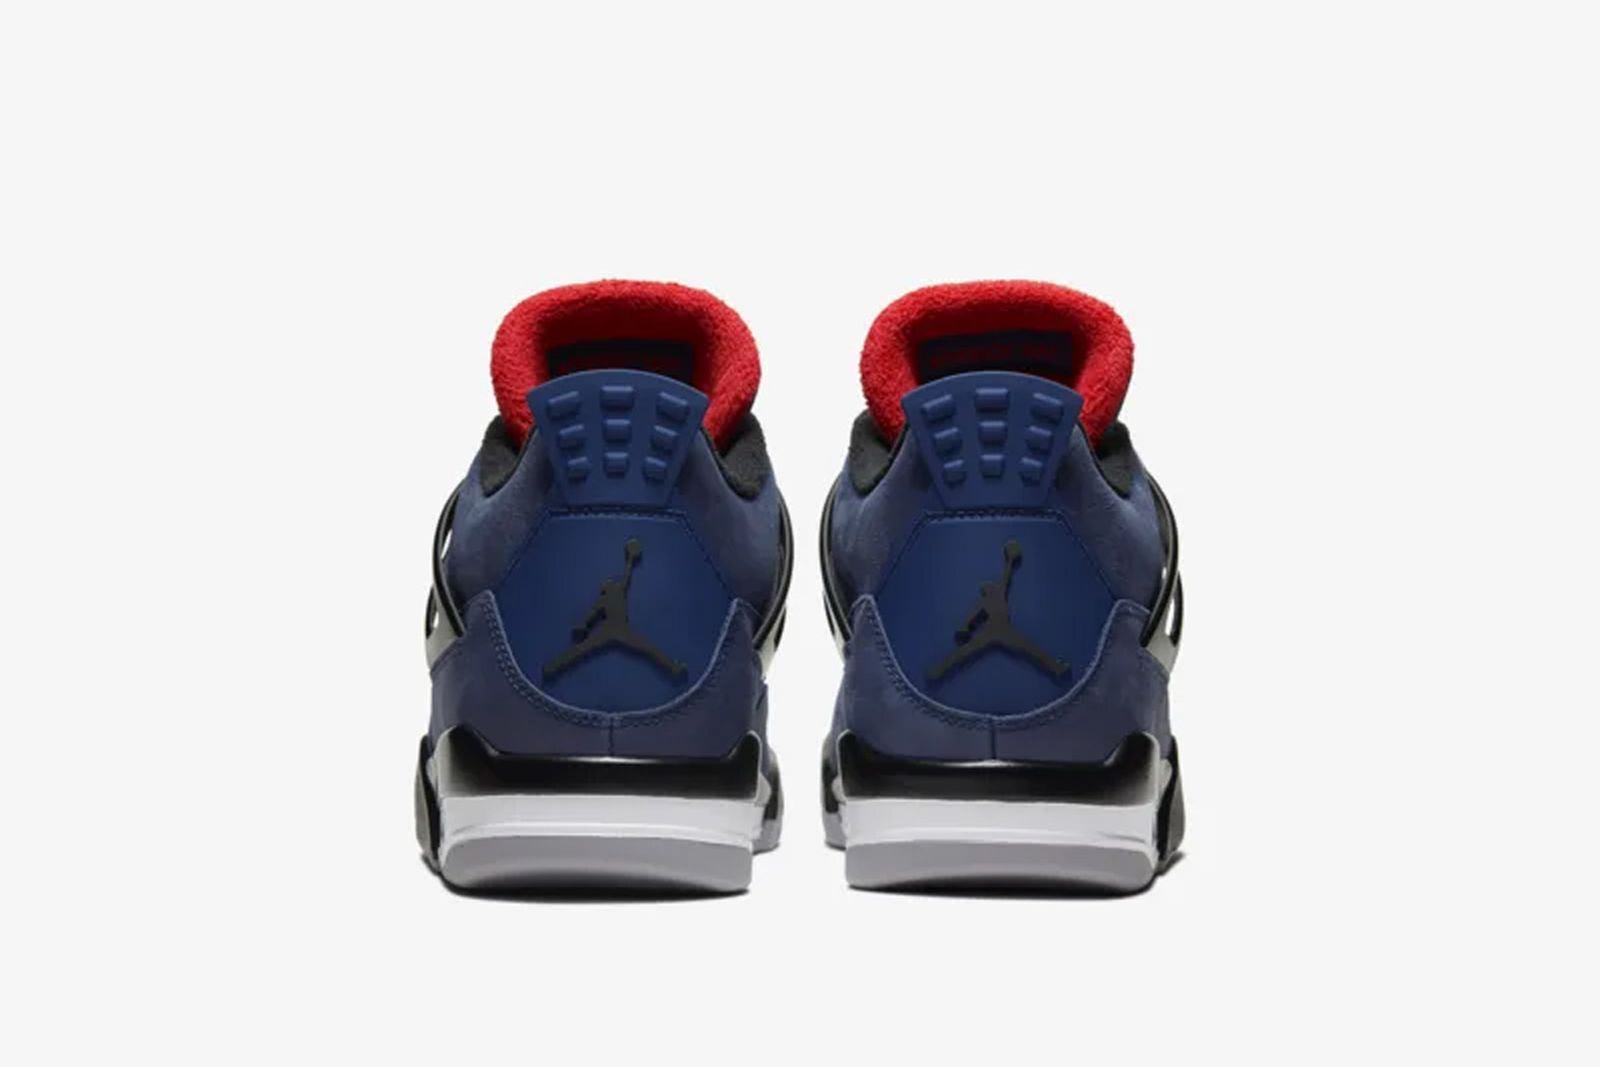 Nike Air Jordan 4 Winterized: Official Images  Where to Buy